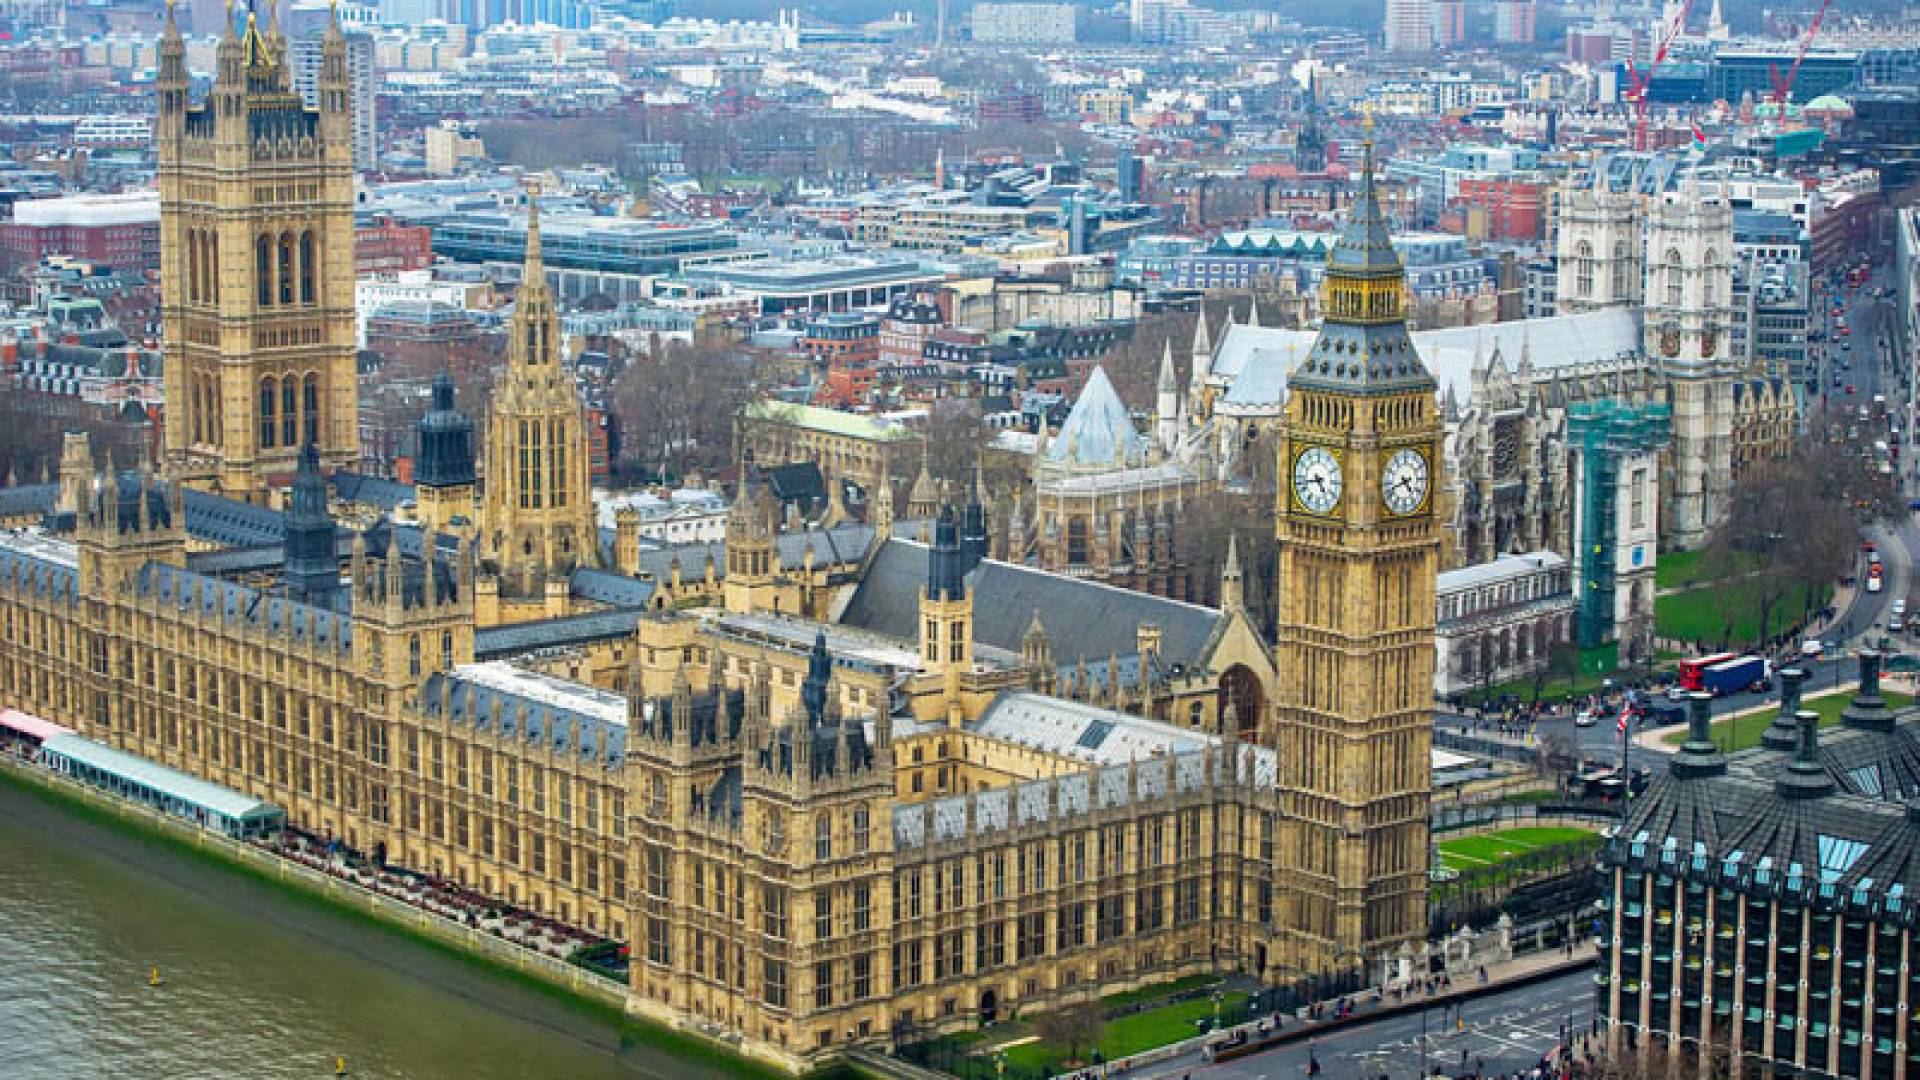 HOUSES OF PARLIAMENT, Westminster History